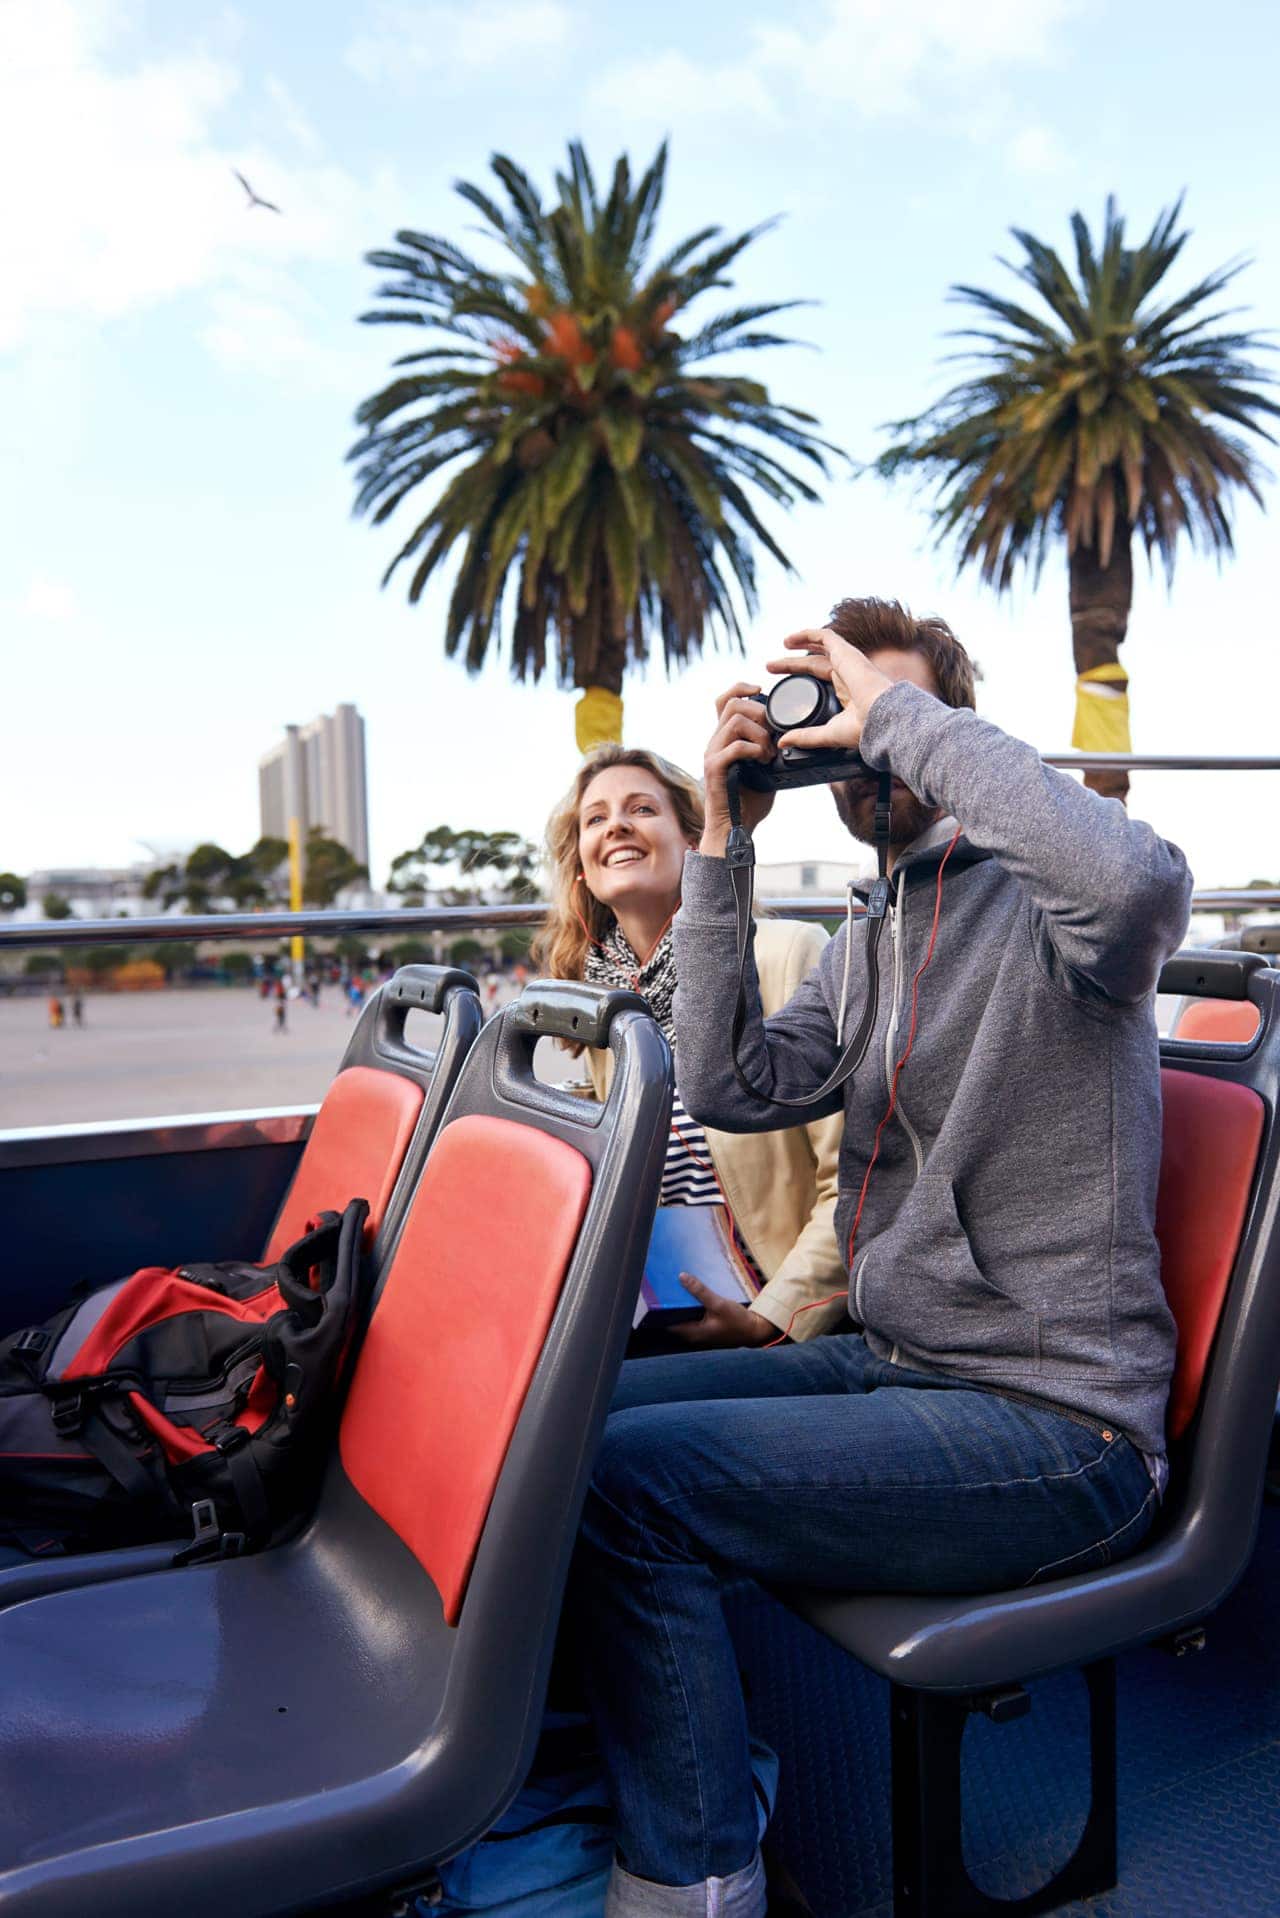 tourists_taking_photos_on_sighseeing_bus_cape_town